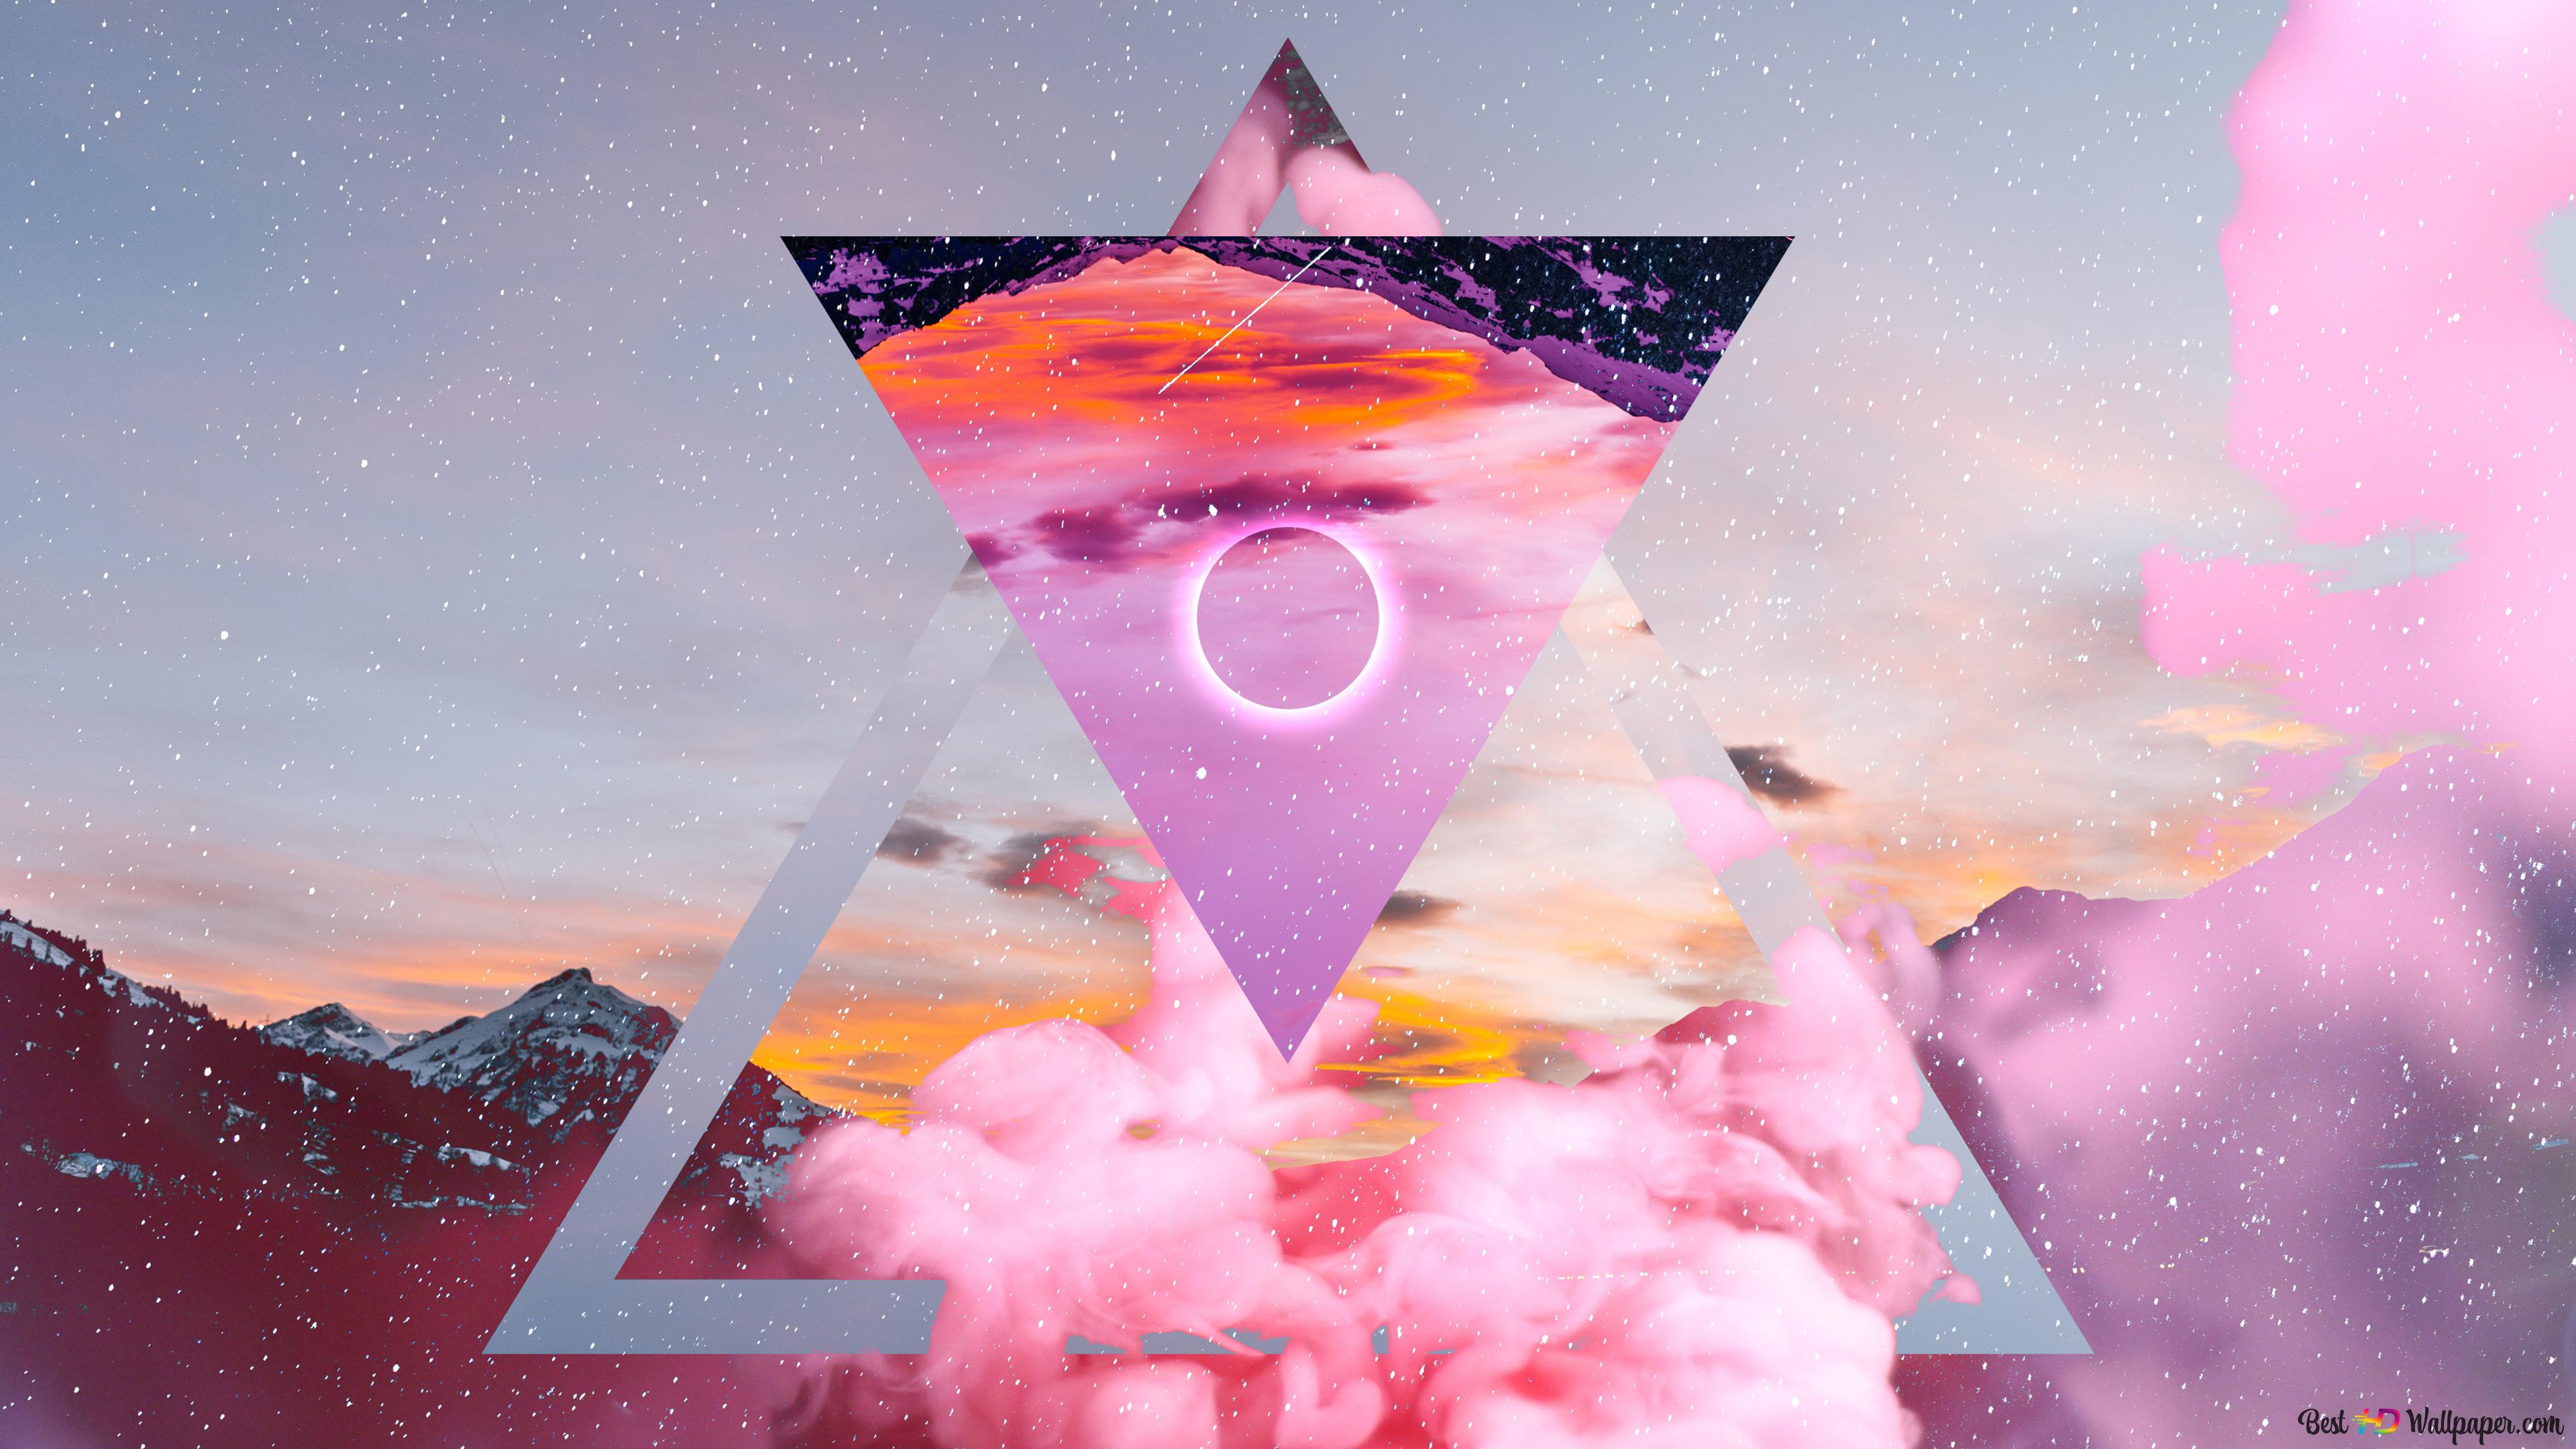 Aesthetic wallpaper with pink clouds, mountains, and a triangle. - 3840x2160